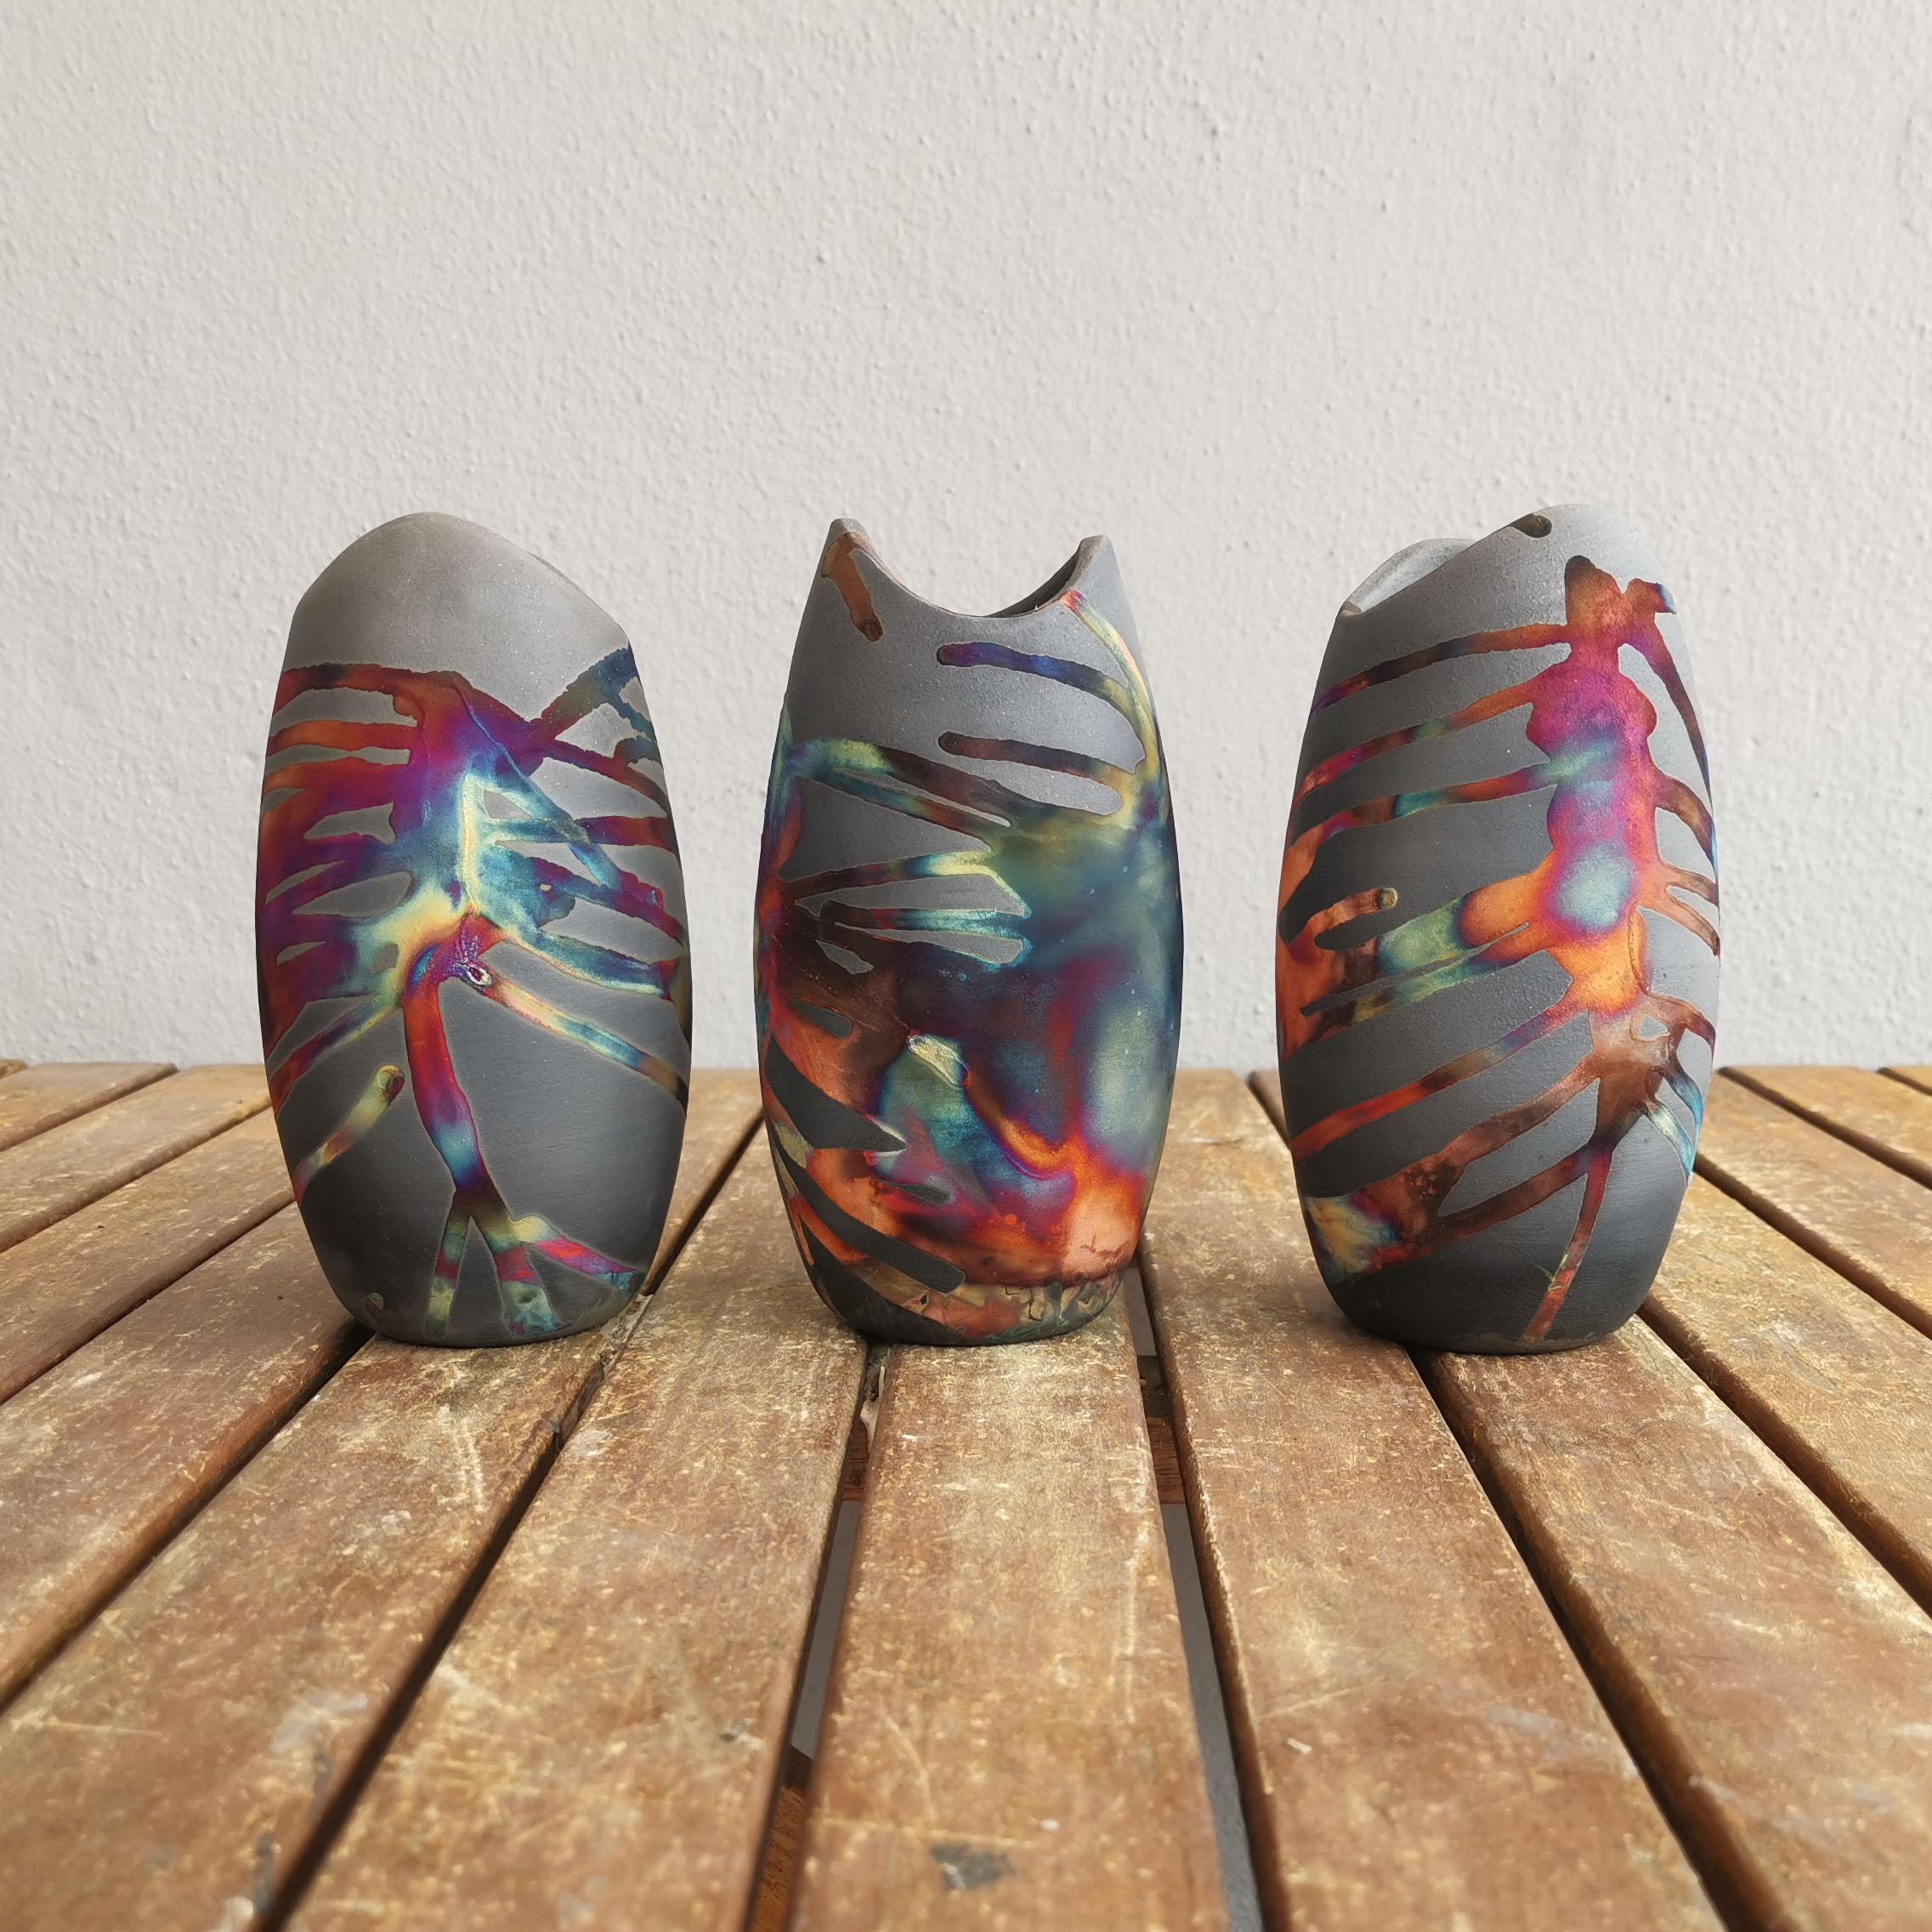 You get :

3 Units of Koi Vase ( does not include dried flowers )

Koi ( 鯉 ) - (n) carp

Our Koi vase is bottle-shaped with a wavy arched mouth which slightly resembles the mouth of a fish. Its eclectic design would blend in well in any interior